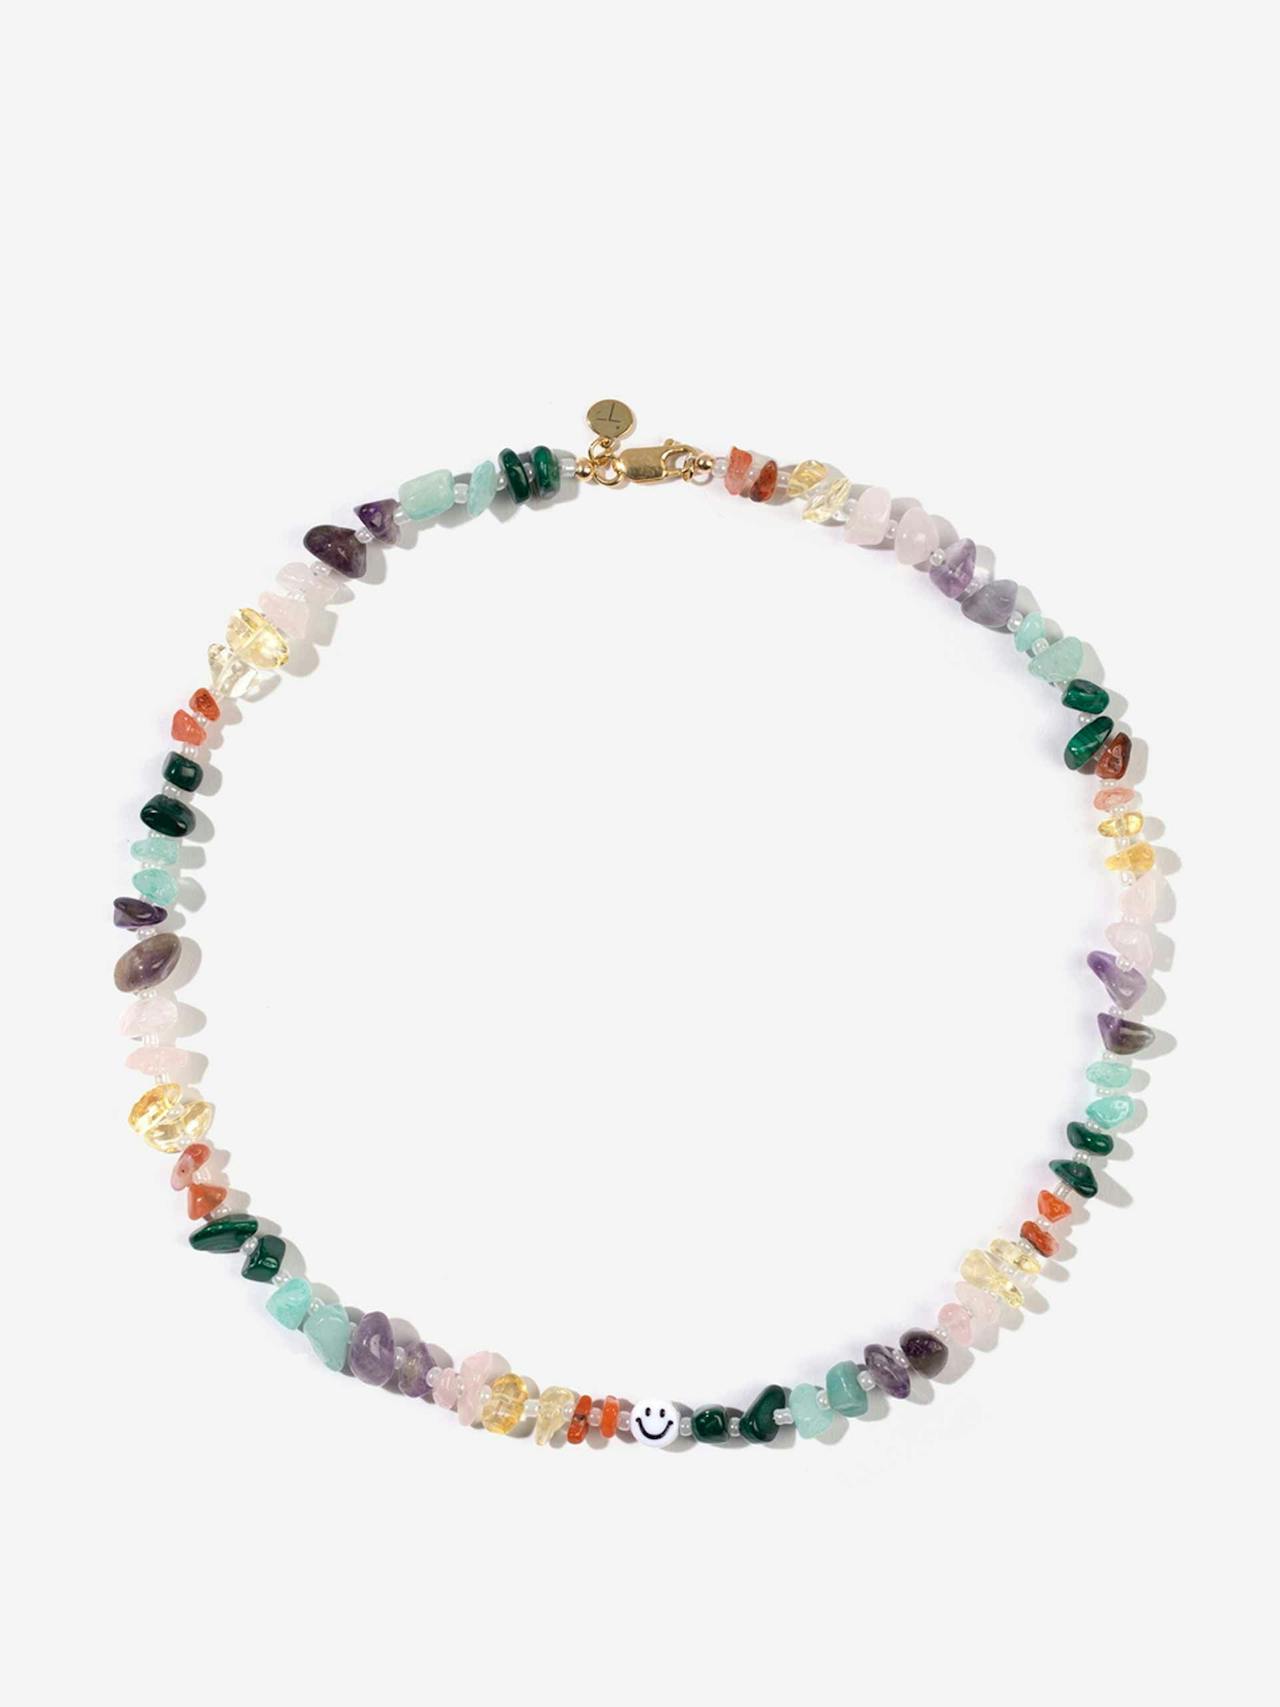 Crystal healing necklace